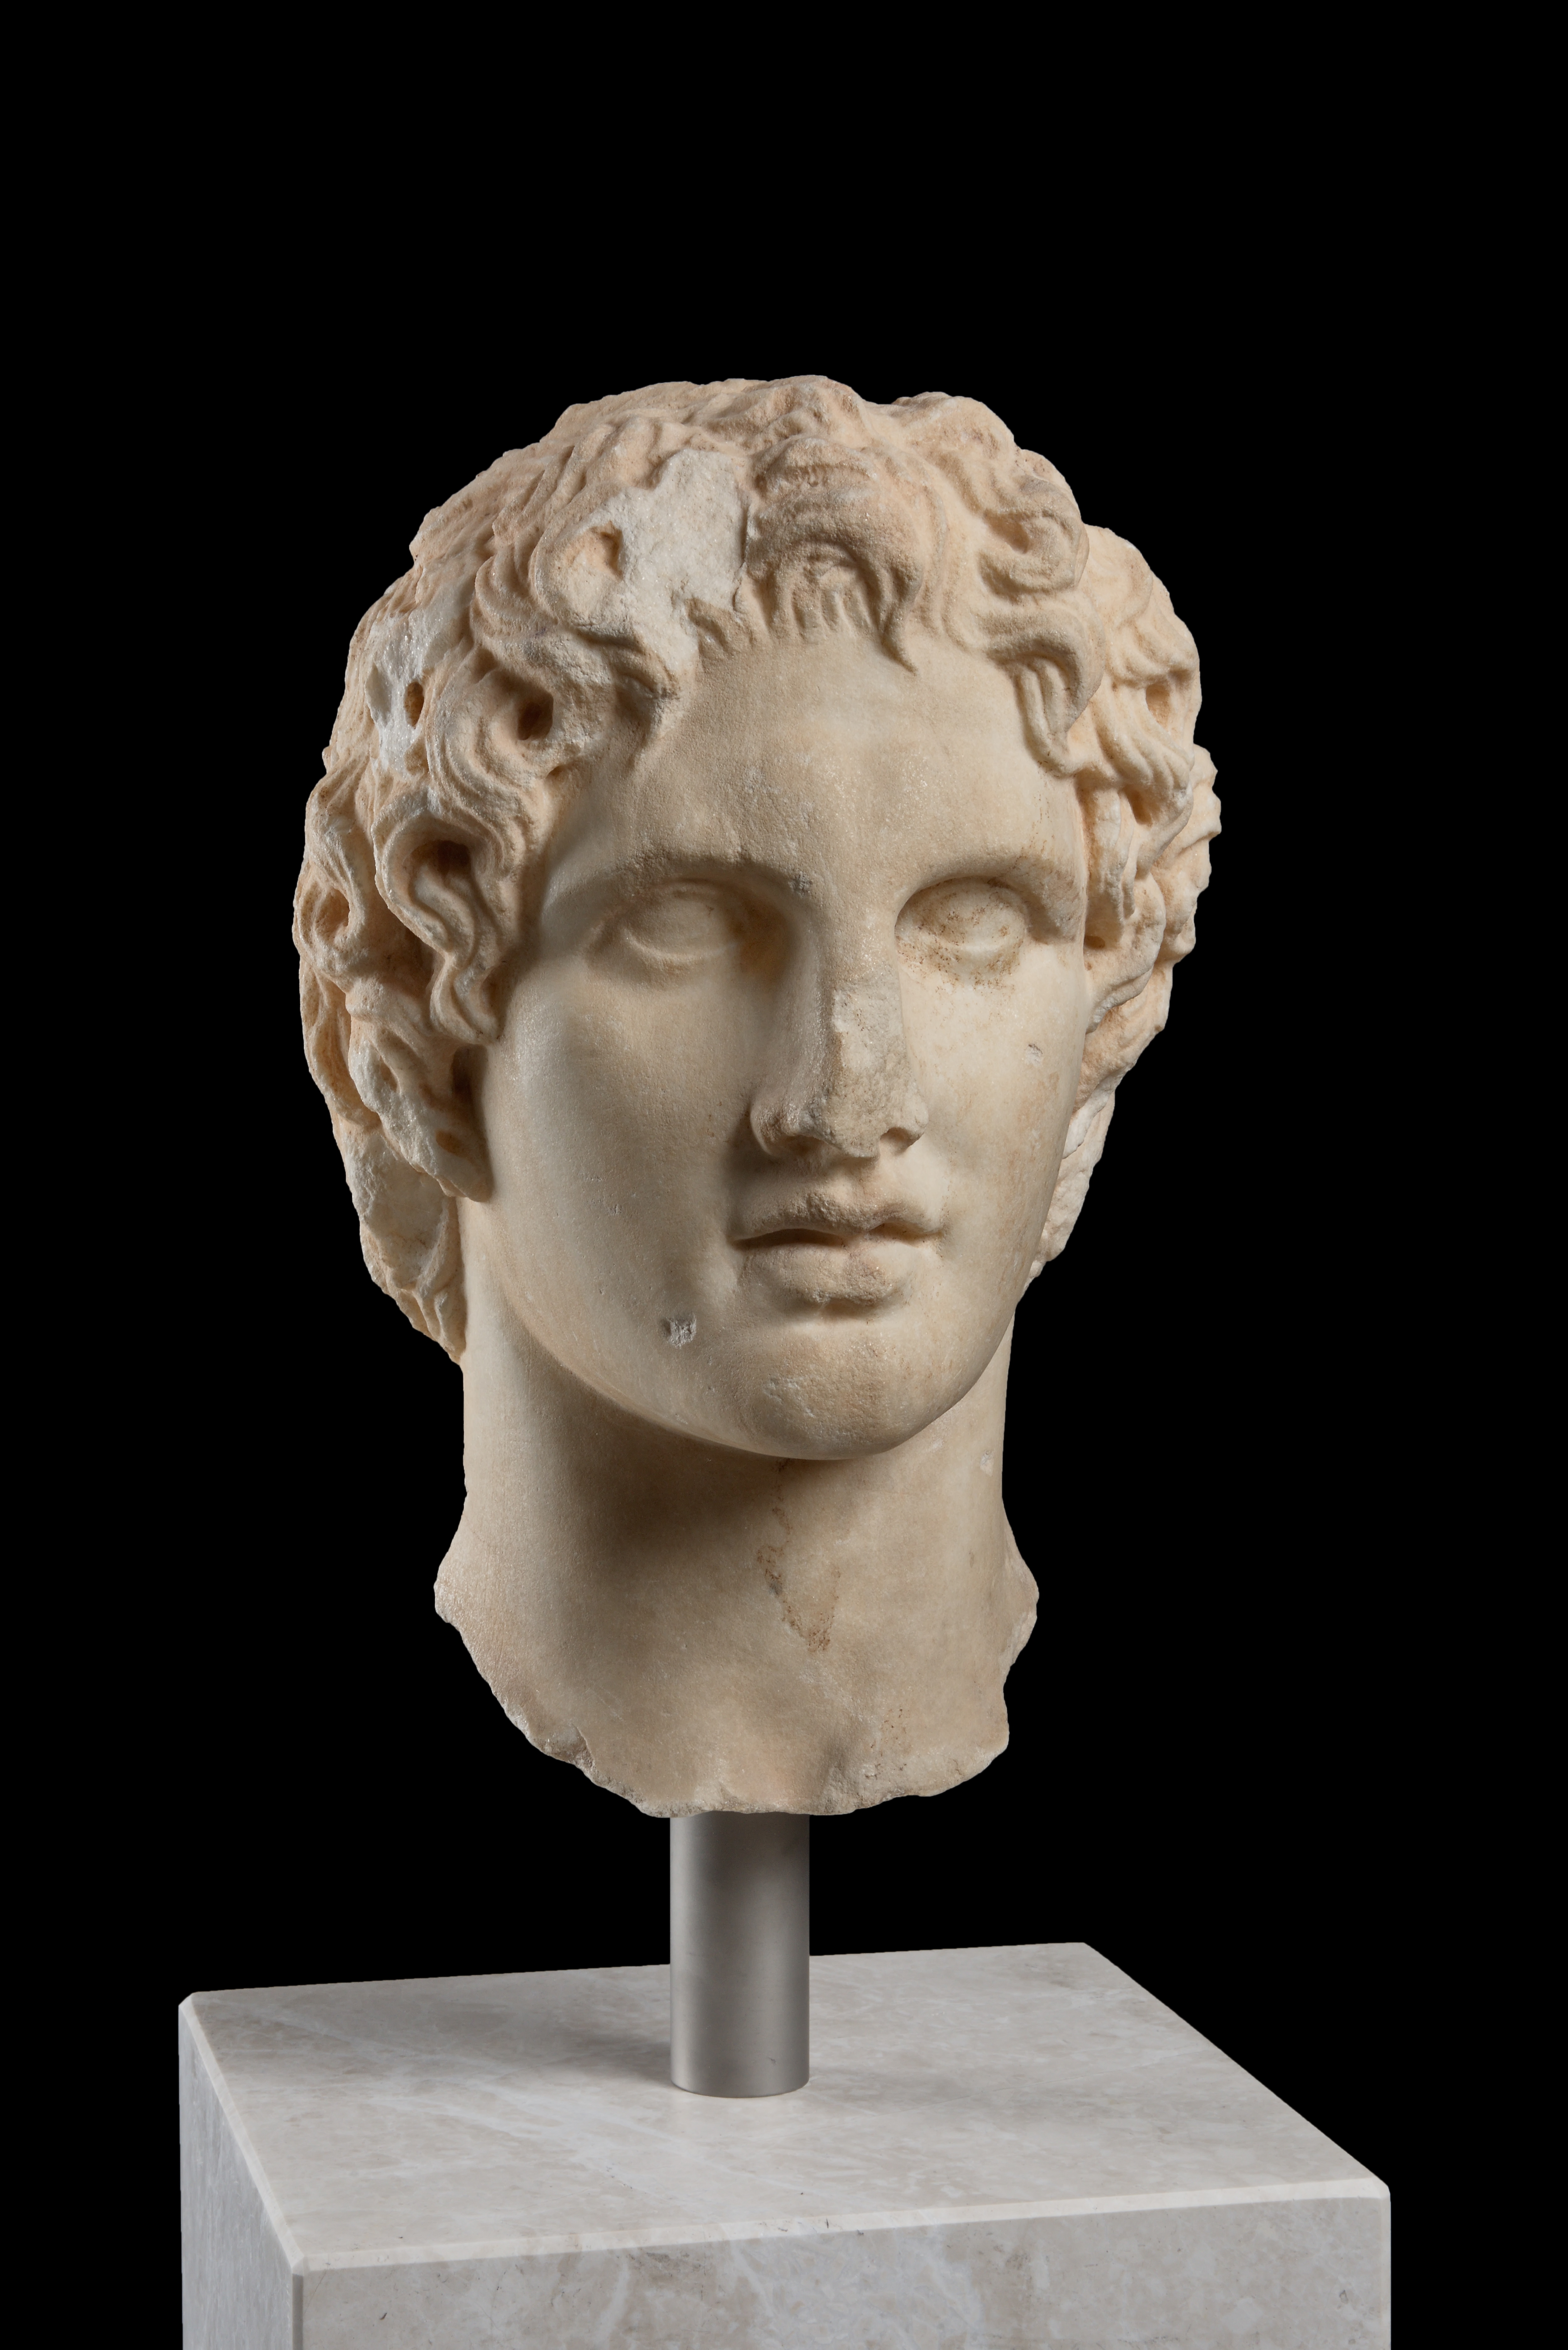 Youthful portrait of Alexander the Great